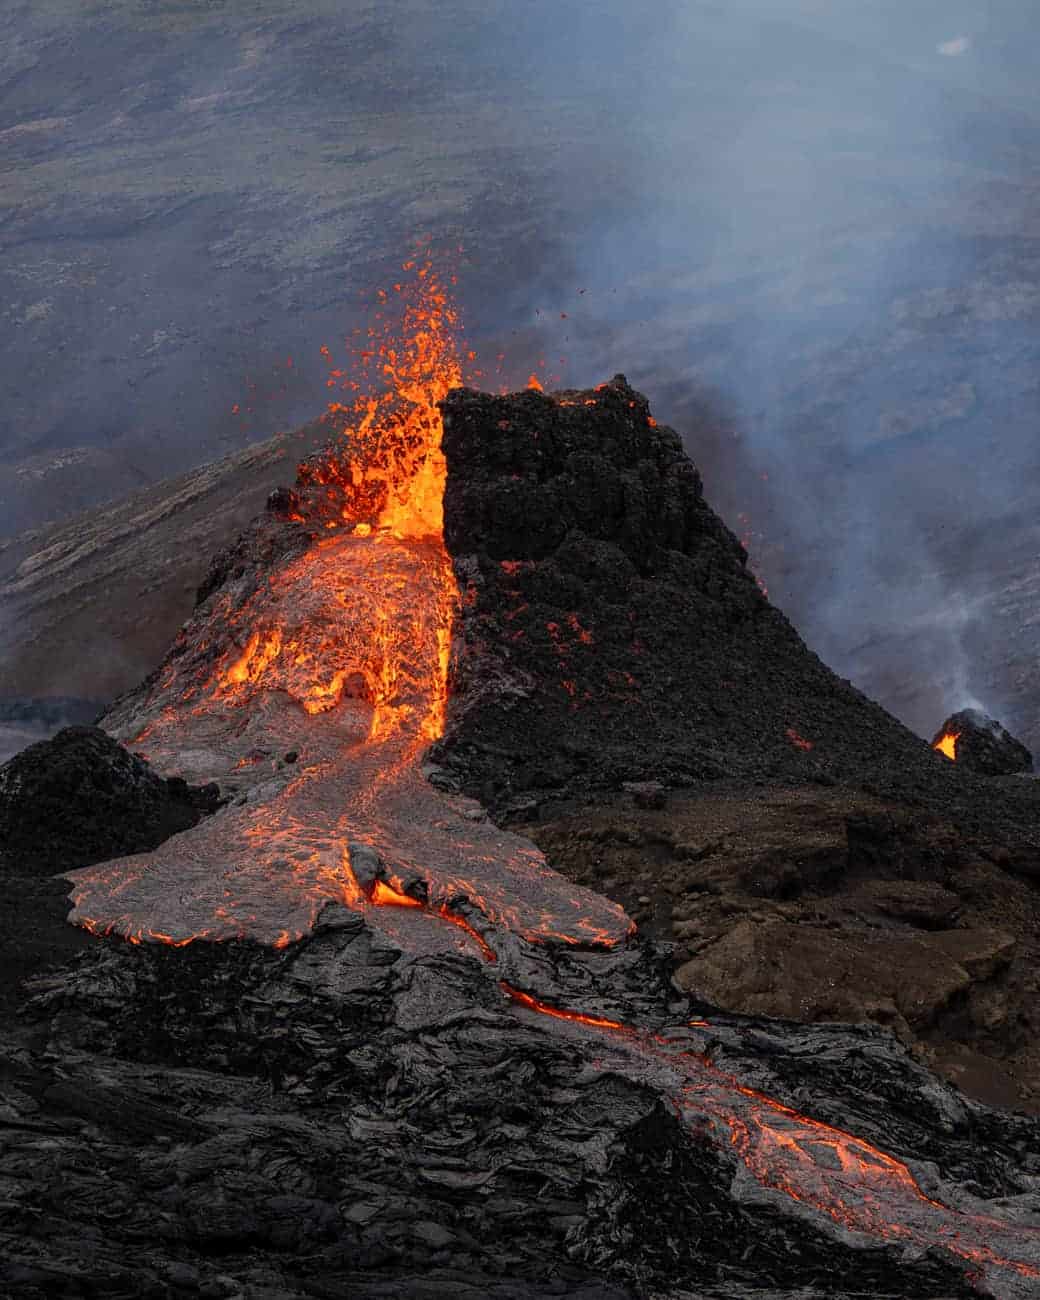 Fagradalsfjall volcano erupting with lava pouring out of the main crater.